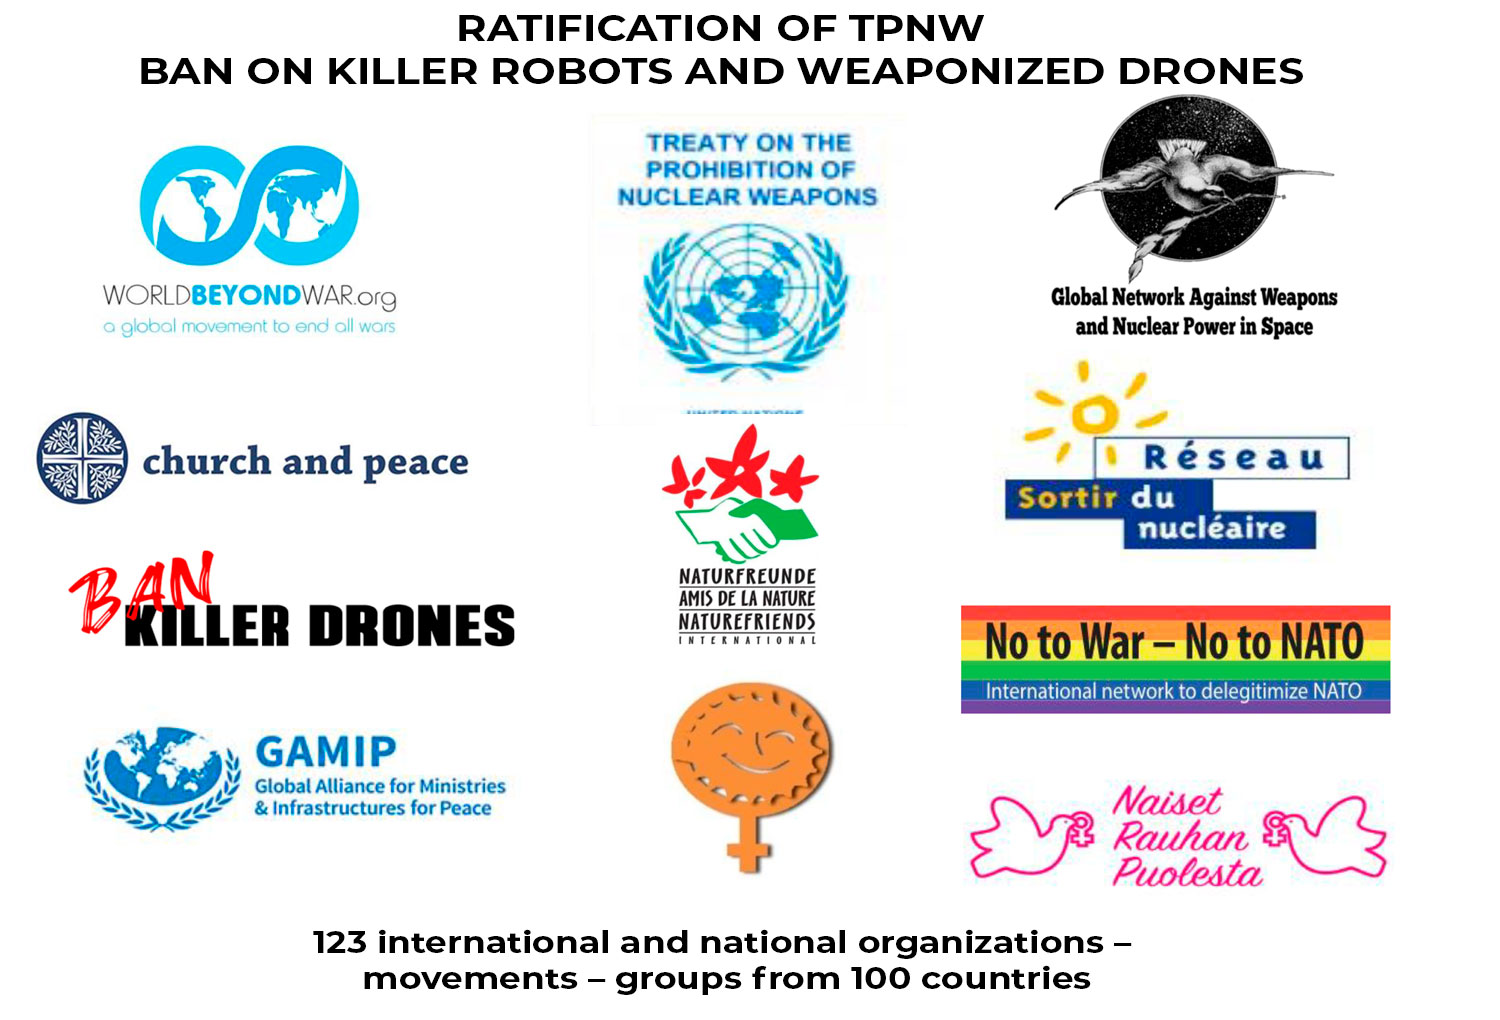 TPNW - BAN ON KILLER ROBOTS/AUTONOMOUS WEAPONS - BAN ON THE USE AND SALE OF WEAPONIZED DRONES